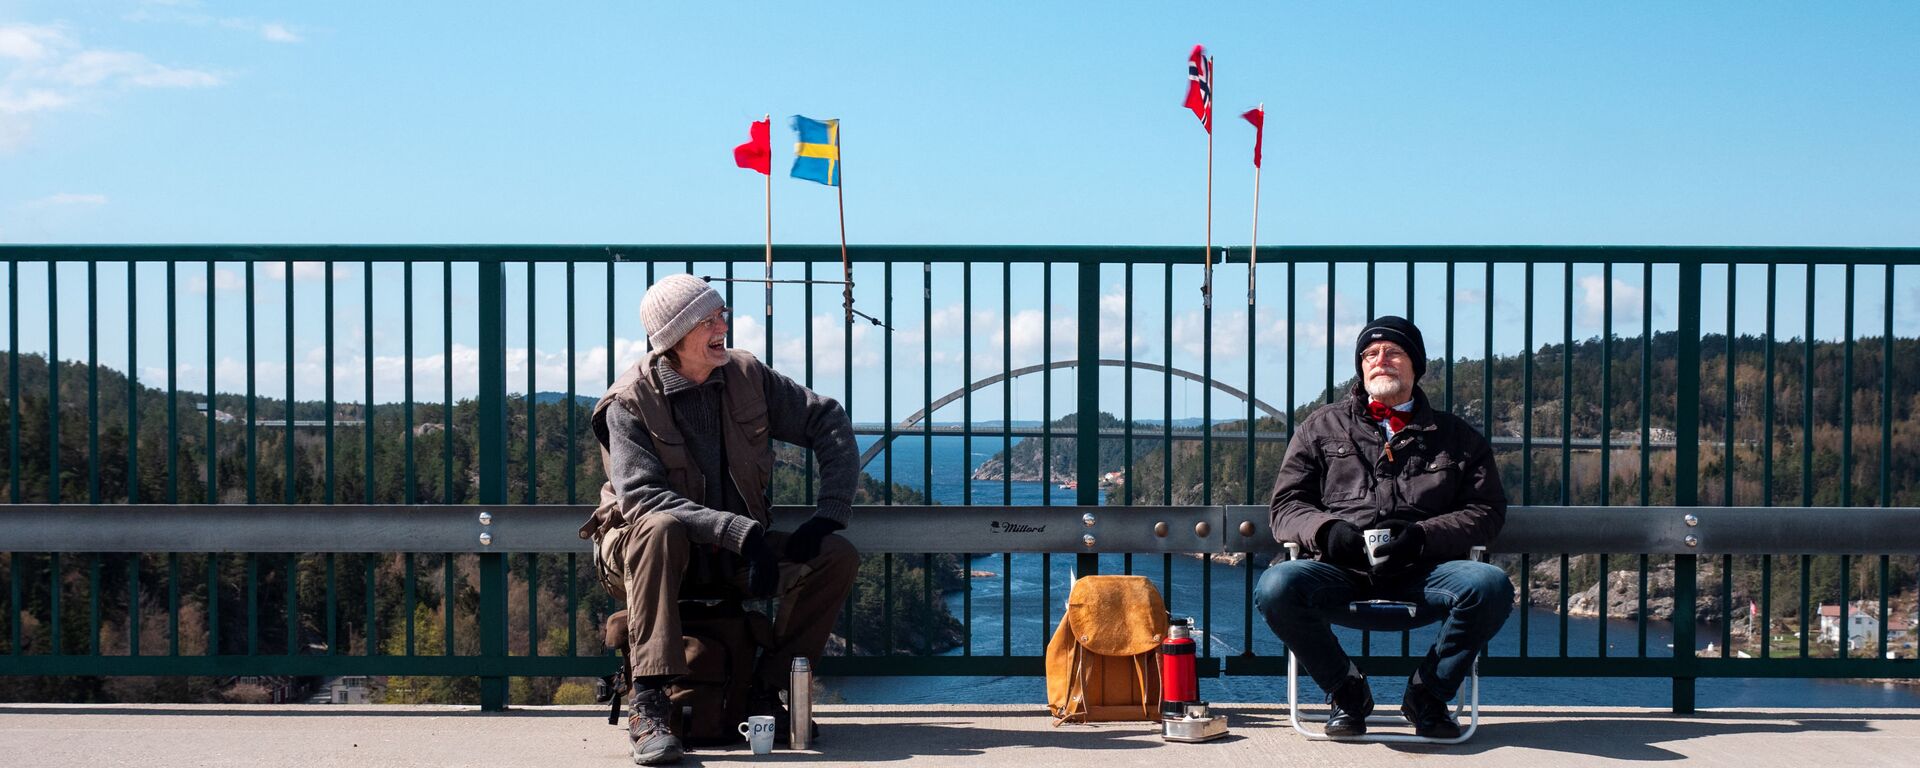 Pontus Berglund (L) sits on the Swedish side while his brother Ola sits on the Norwegian side of the old bridge of Svinesund with the respective country flags and the new Svinesund Bridge in the background, in Svinesund, Norway  and Sweden, on May 1, 2021 - Sputnik International, 1920, 02.02.2022